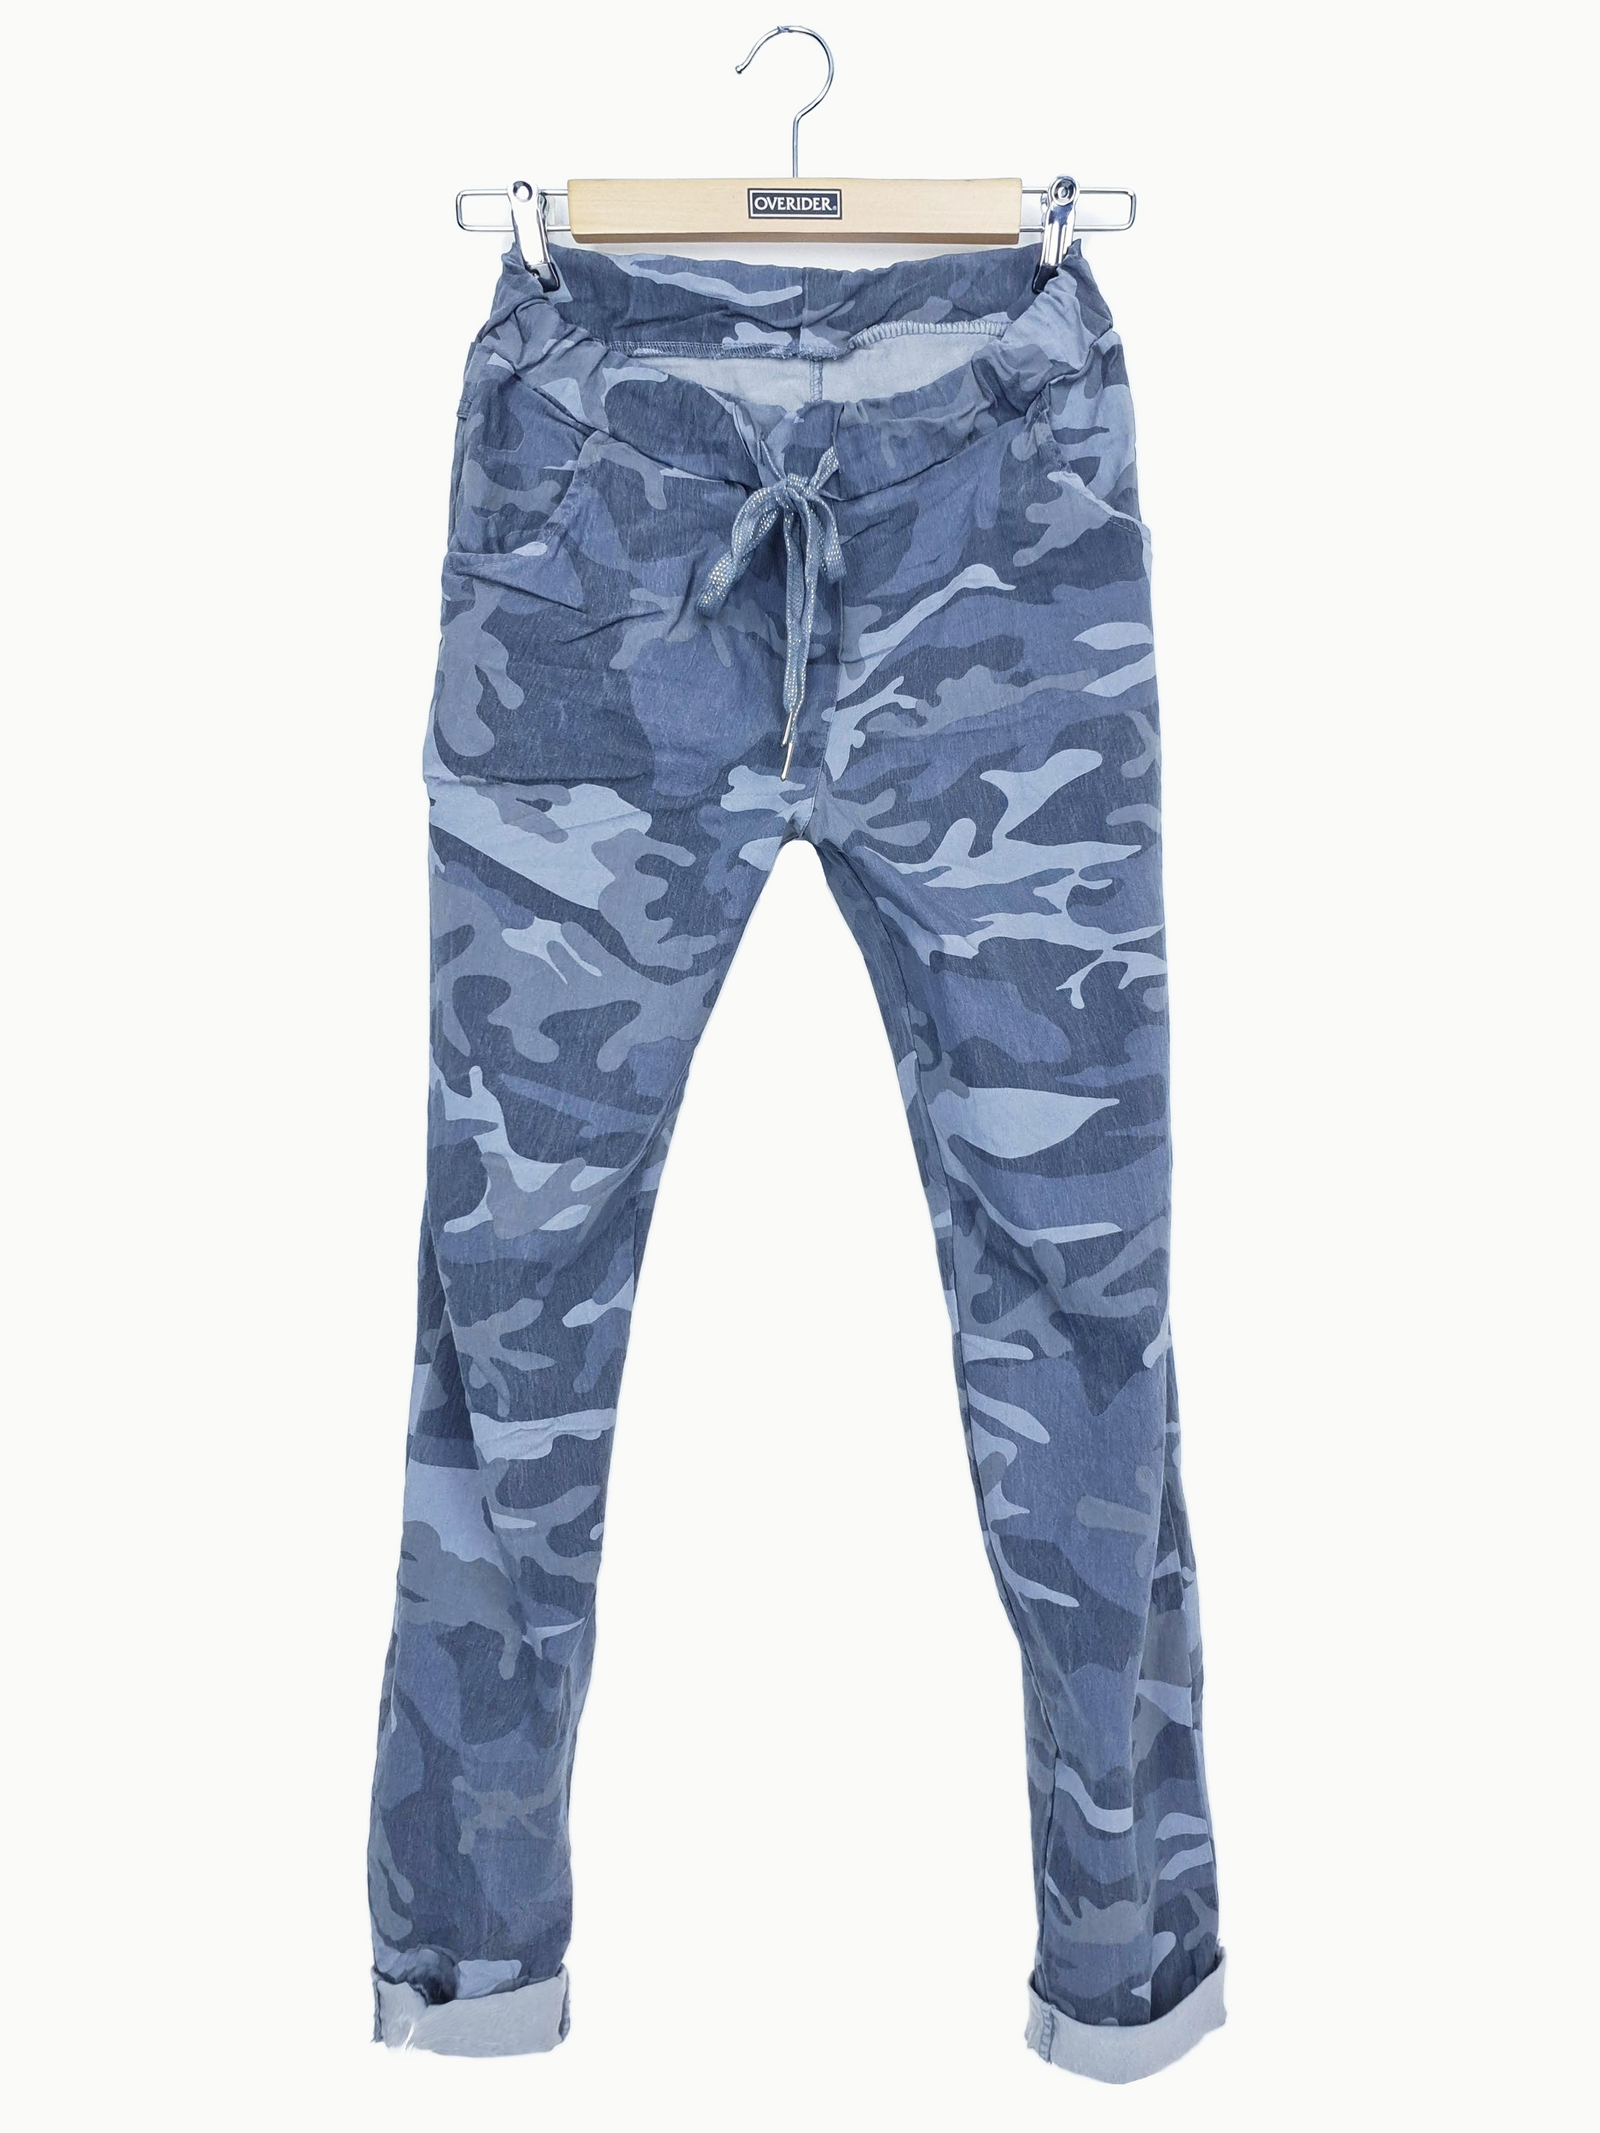 MARTA - Pull-on Joggers - Blue Camouflage